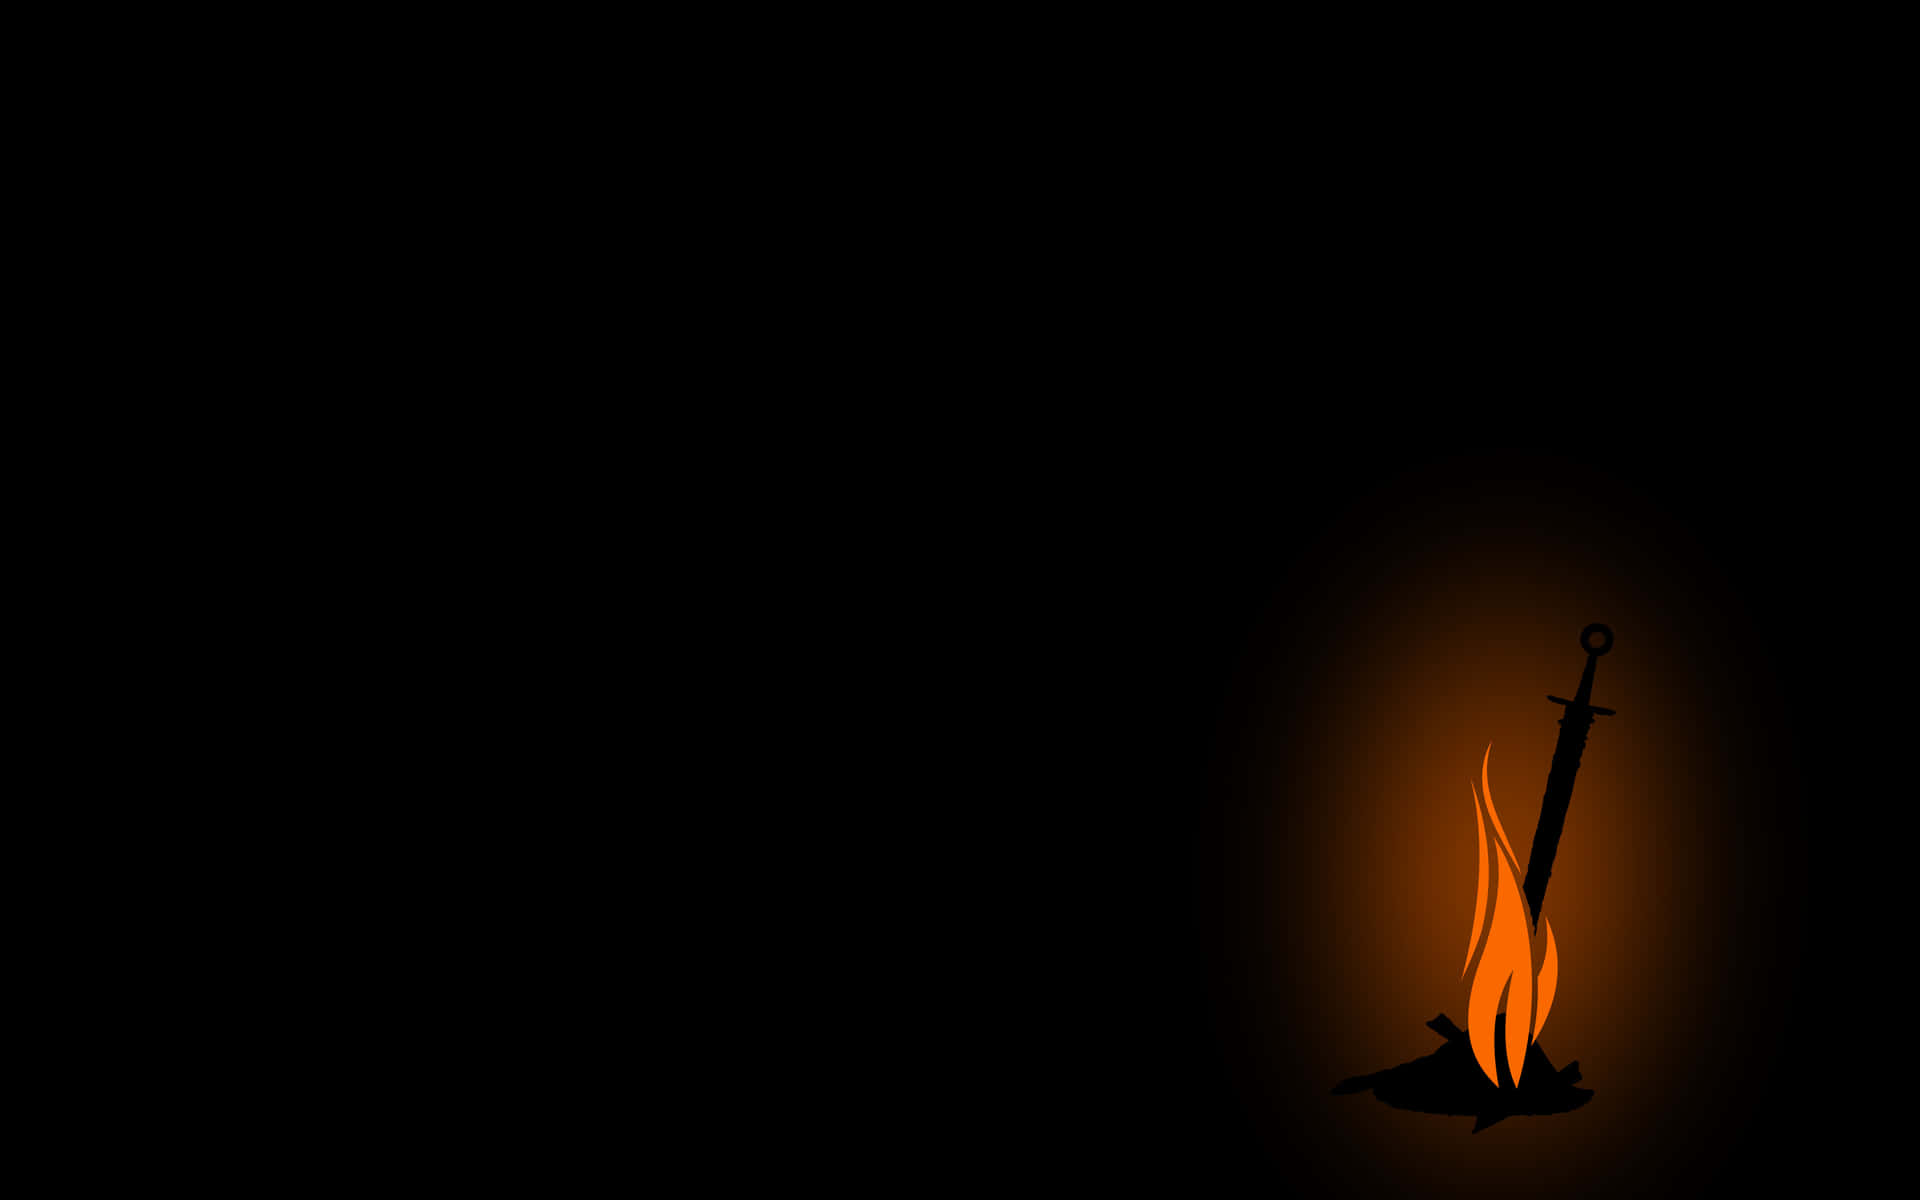 Dark Souls Bonfire - Embrace the Serenity and Warmth Wallpaper